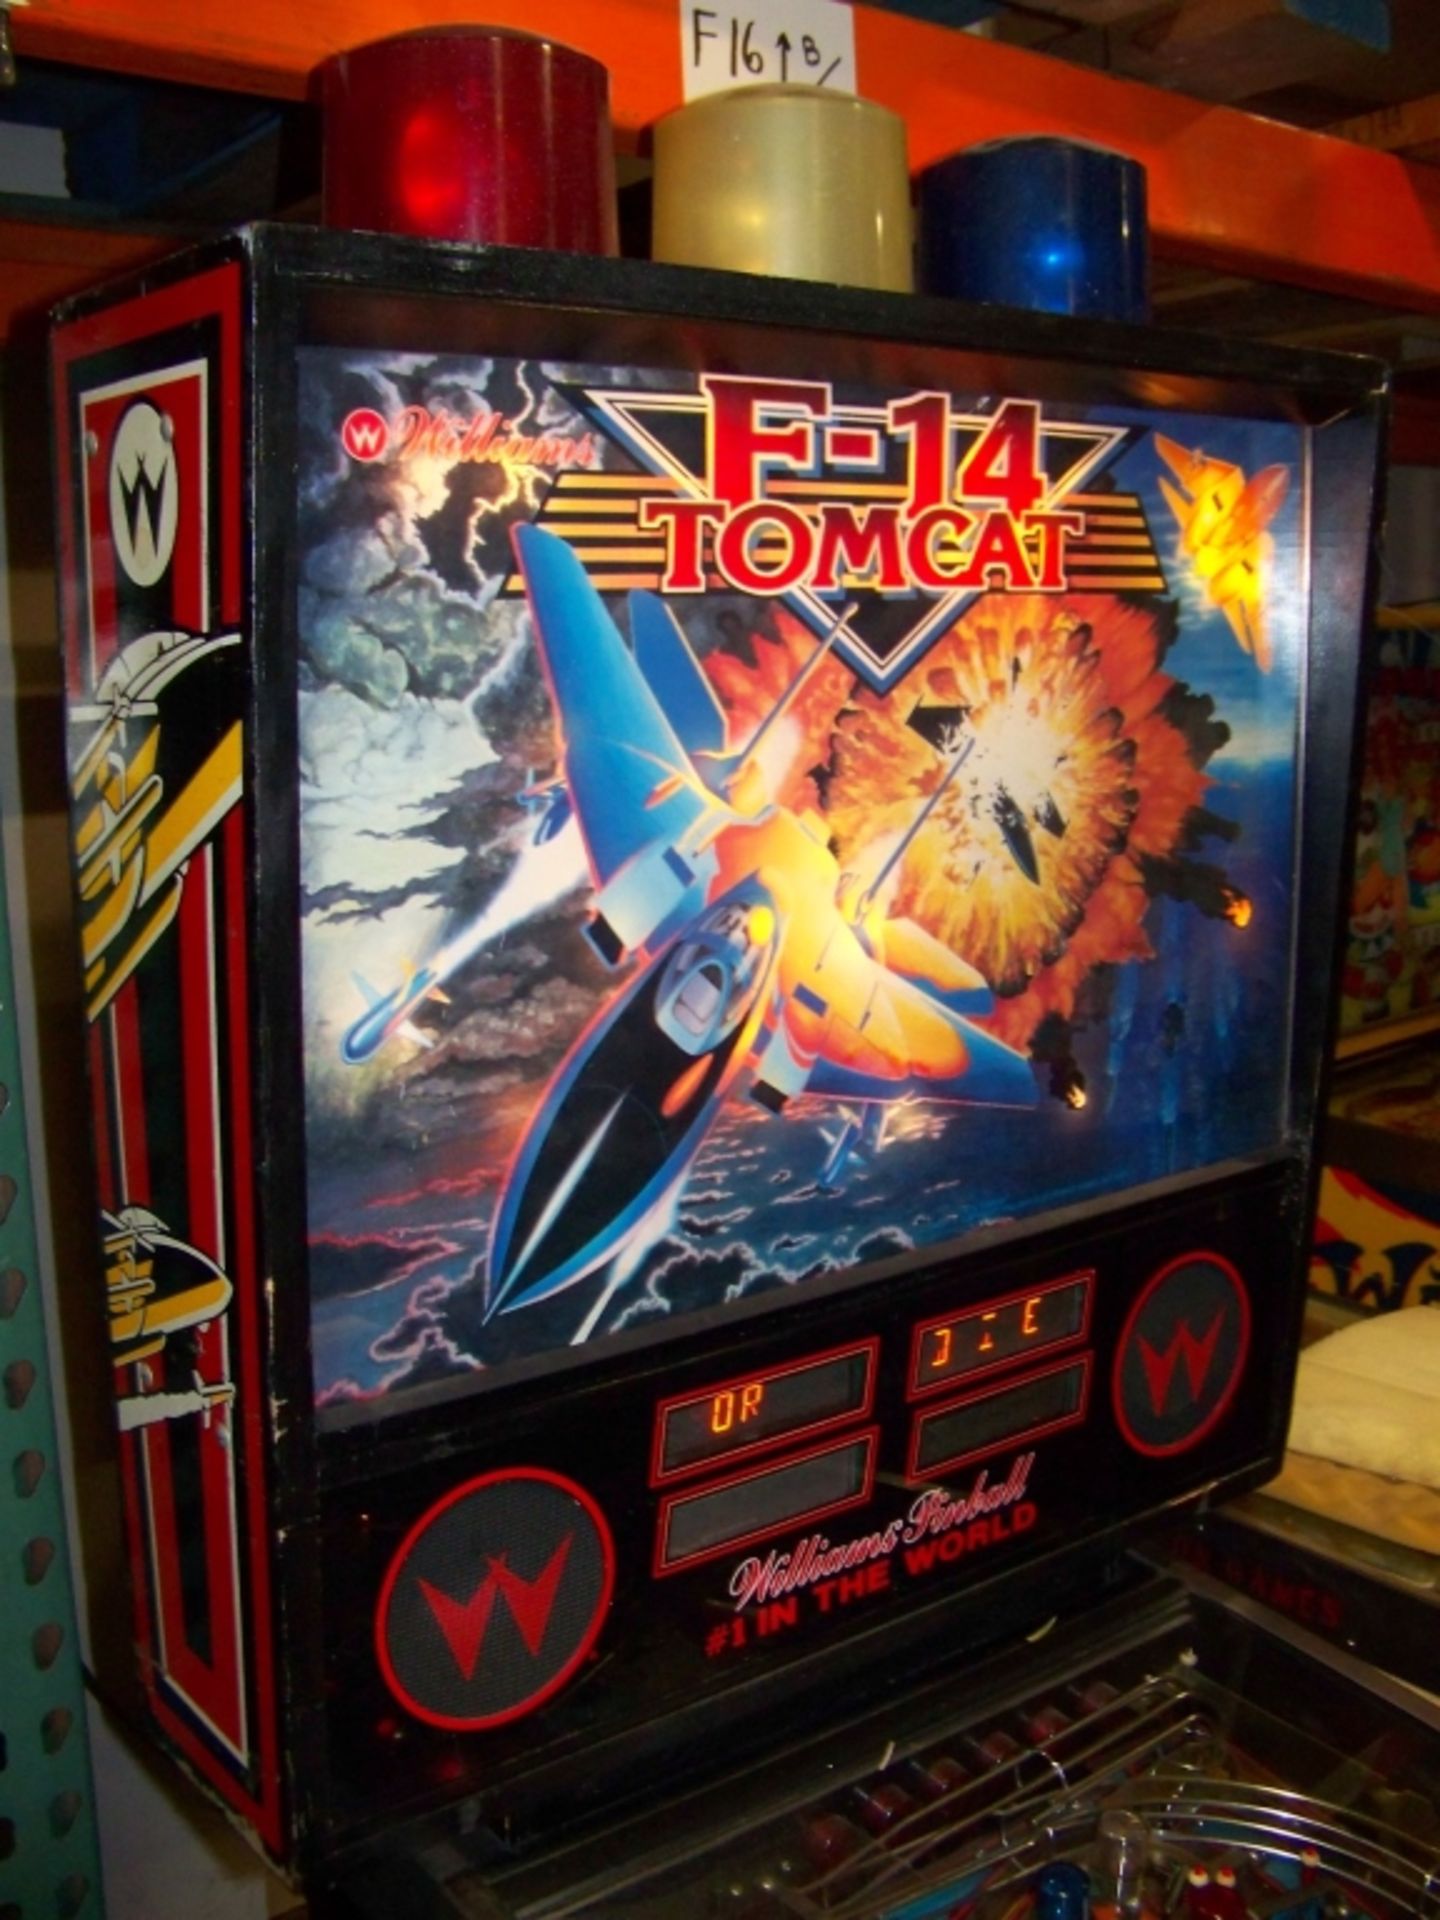 F-14 TOMCAT PINBALL MACHINE WILLIAMS 1987 Item is in used condition. Evidence of wear and commercial - Image 5 of 9